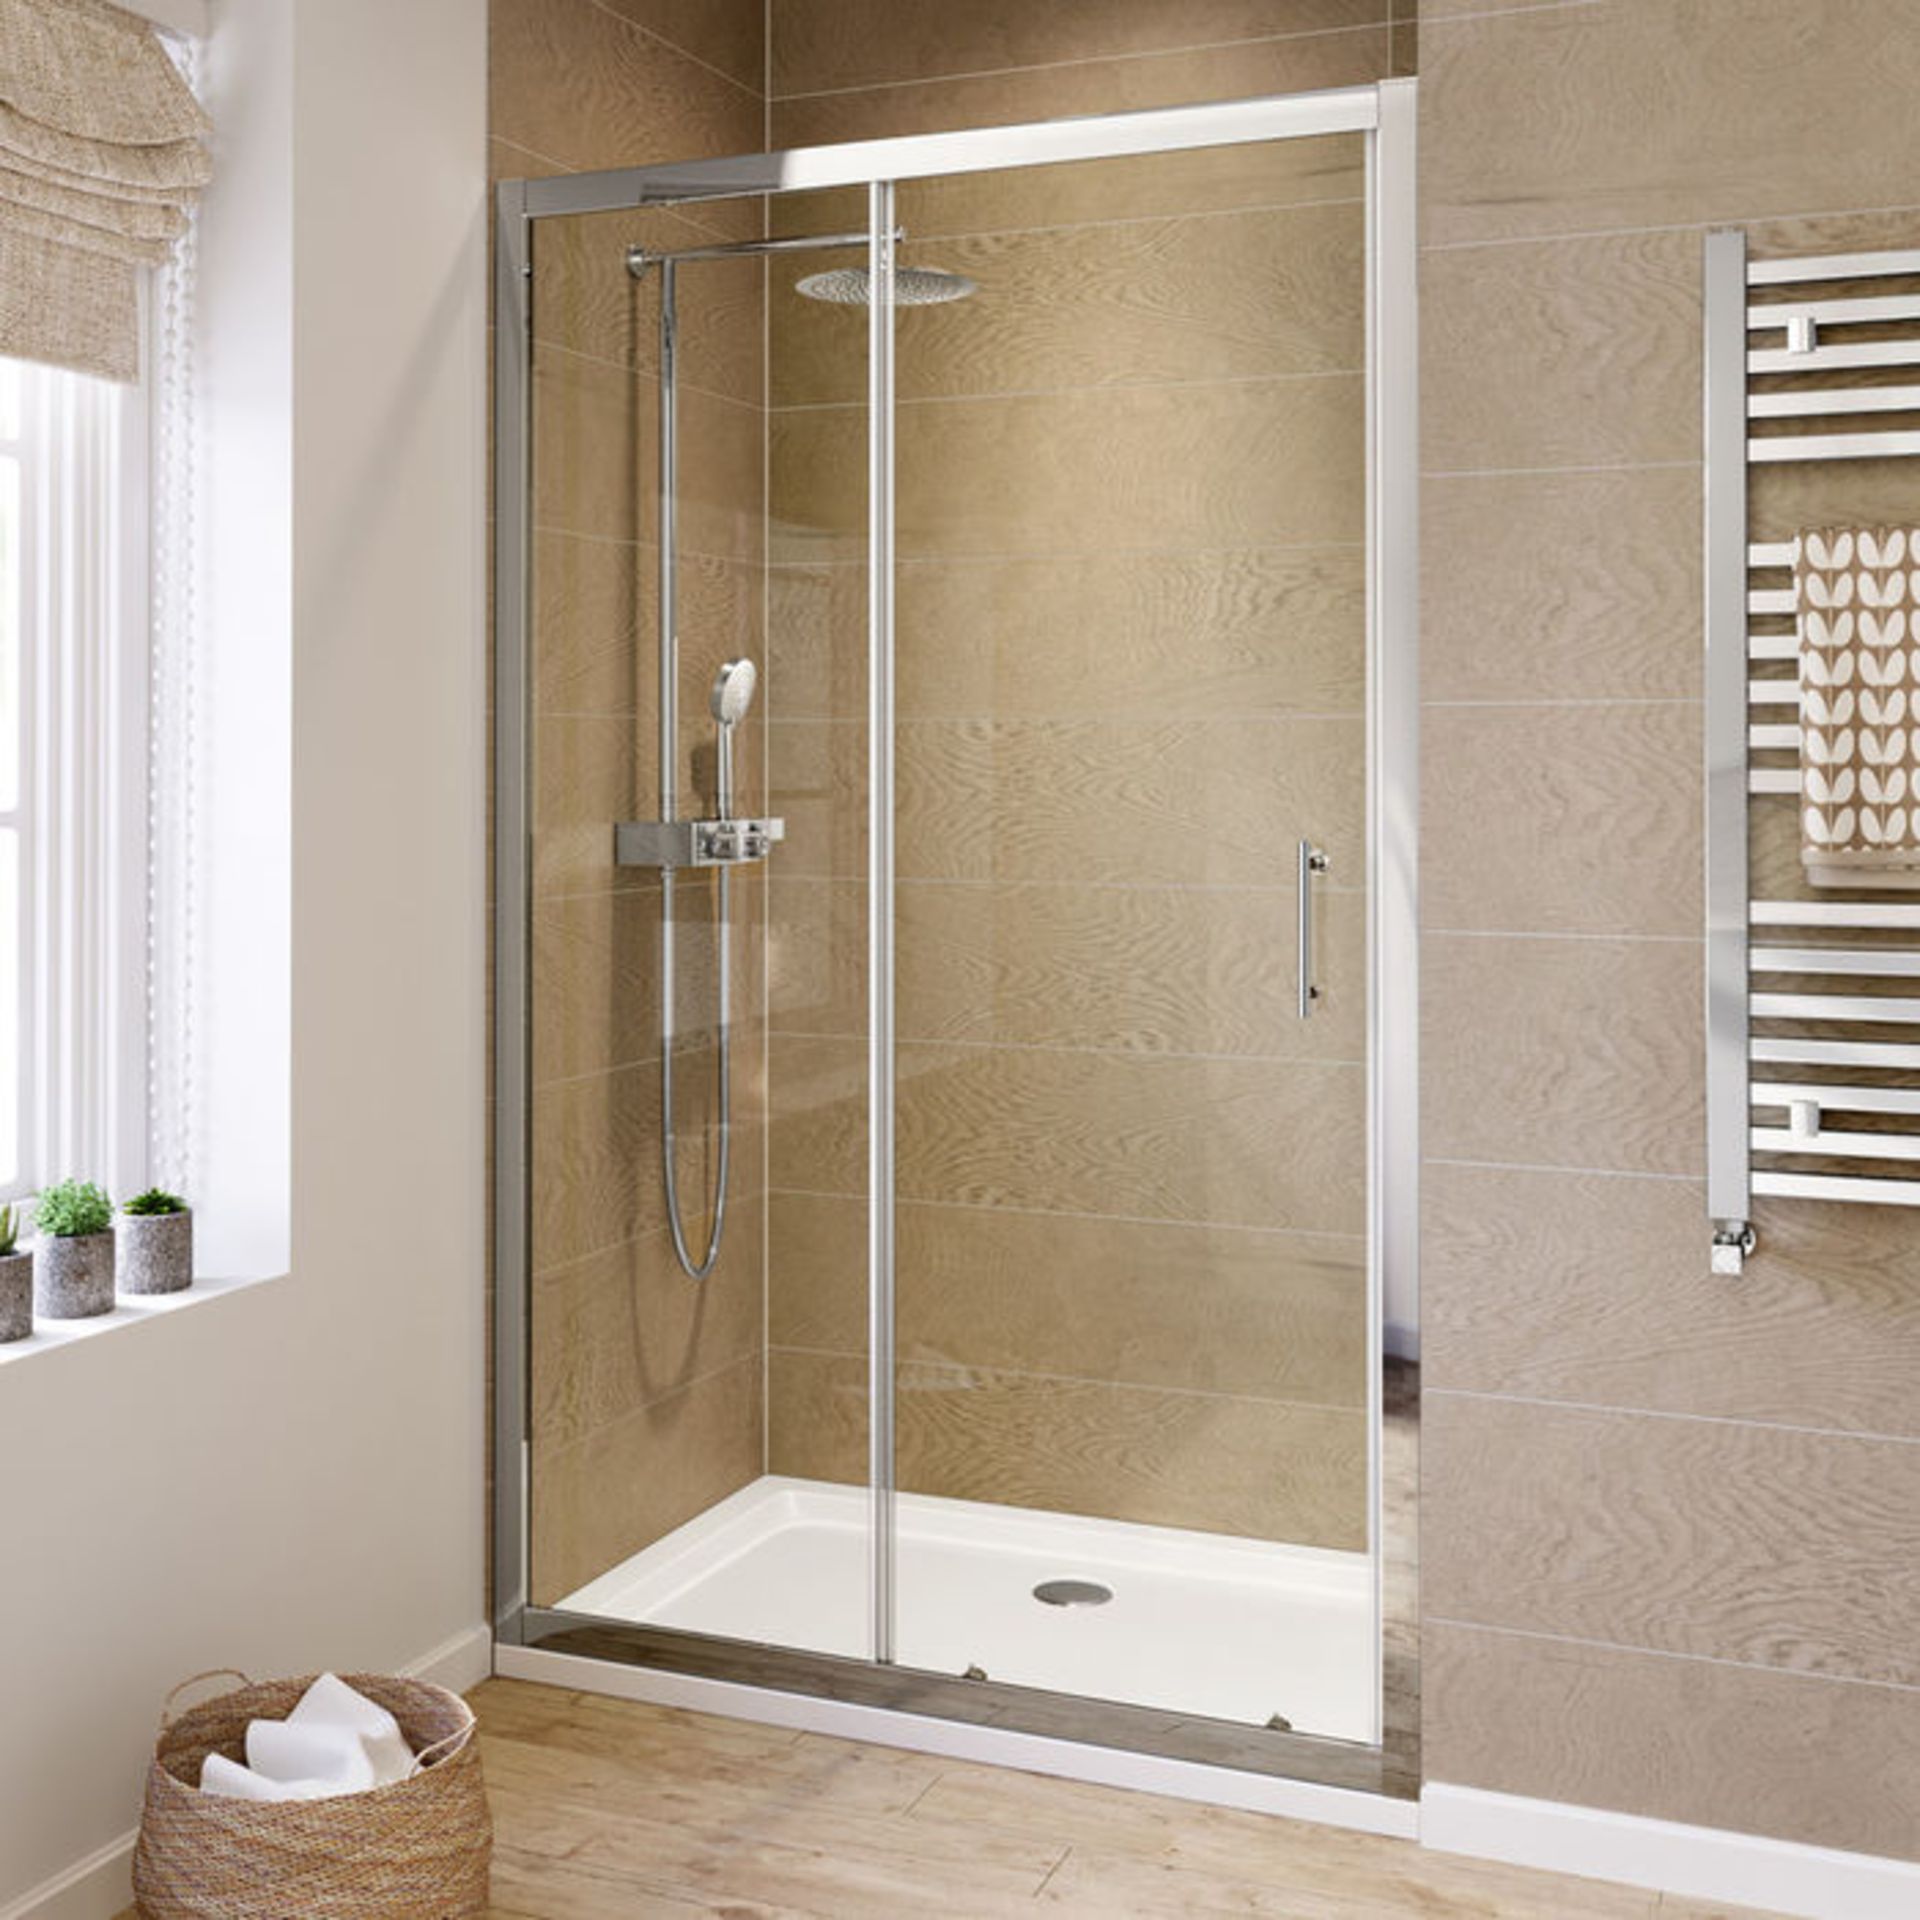 (XM150) 1200mm - 6mm - Elements Sliding Shower Door. RRP £299.99. 6mm Safety Glass Fully